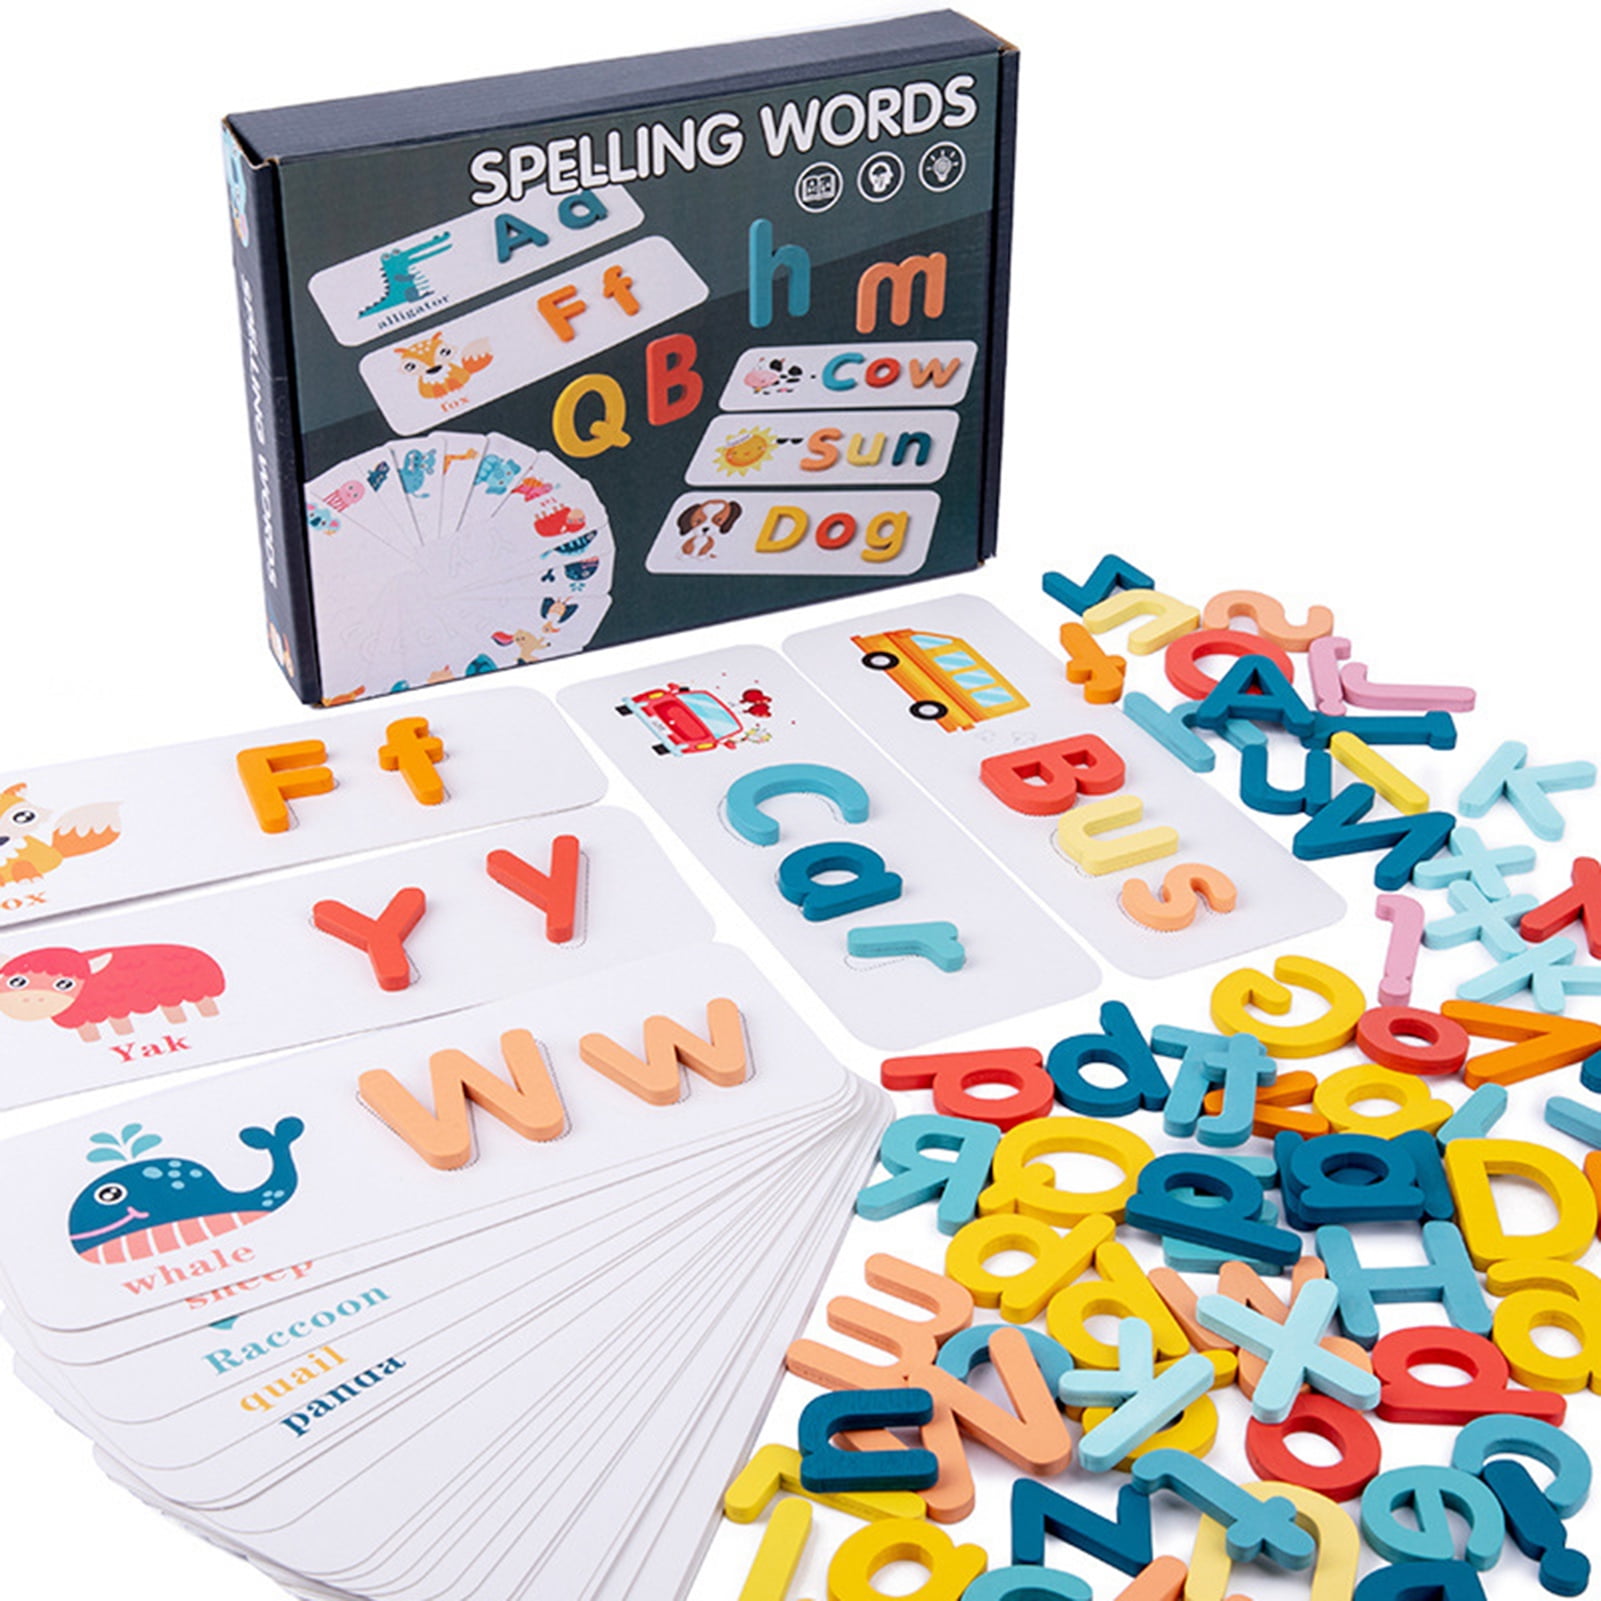 See and Spell Learning Toys Sight Words Games Wooden Letters Jigsaw Puzzles Alphabet Words Flash Cards Educational Toys Gift for Toddlers Age 3 Years Matching Letter Game Best Xmas Gifts 